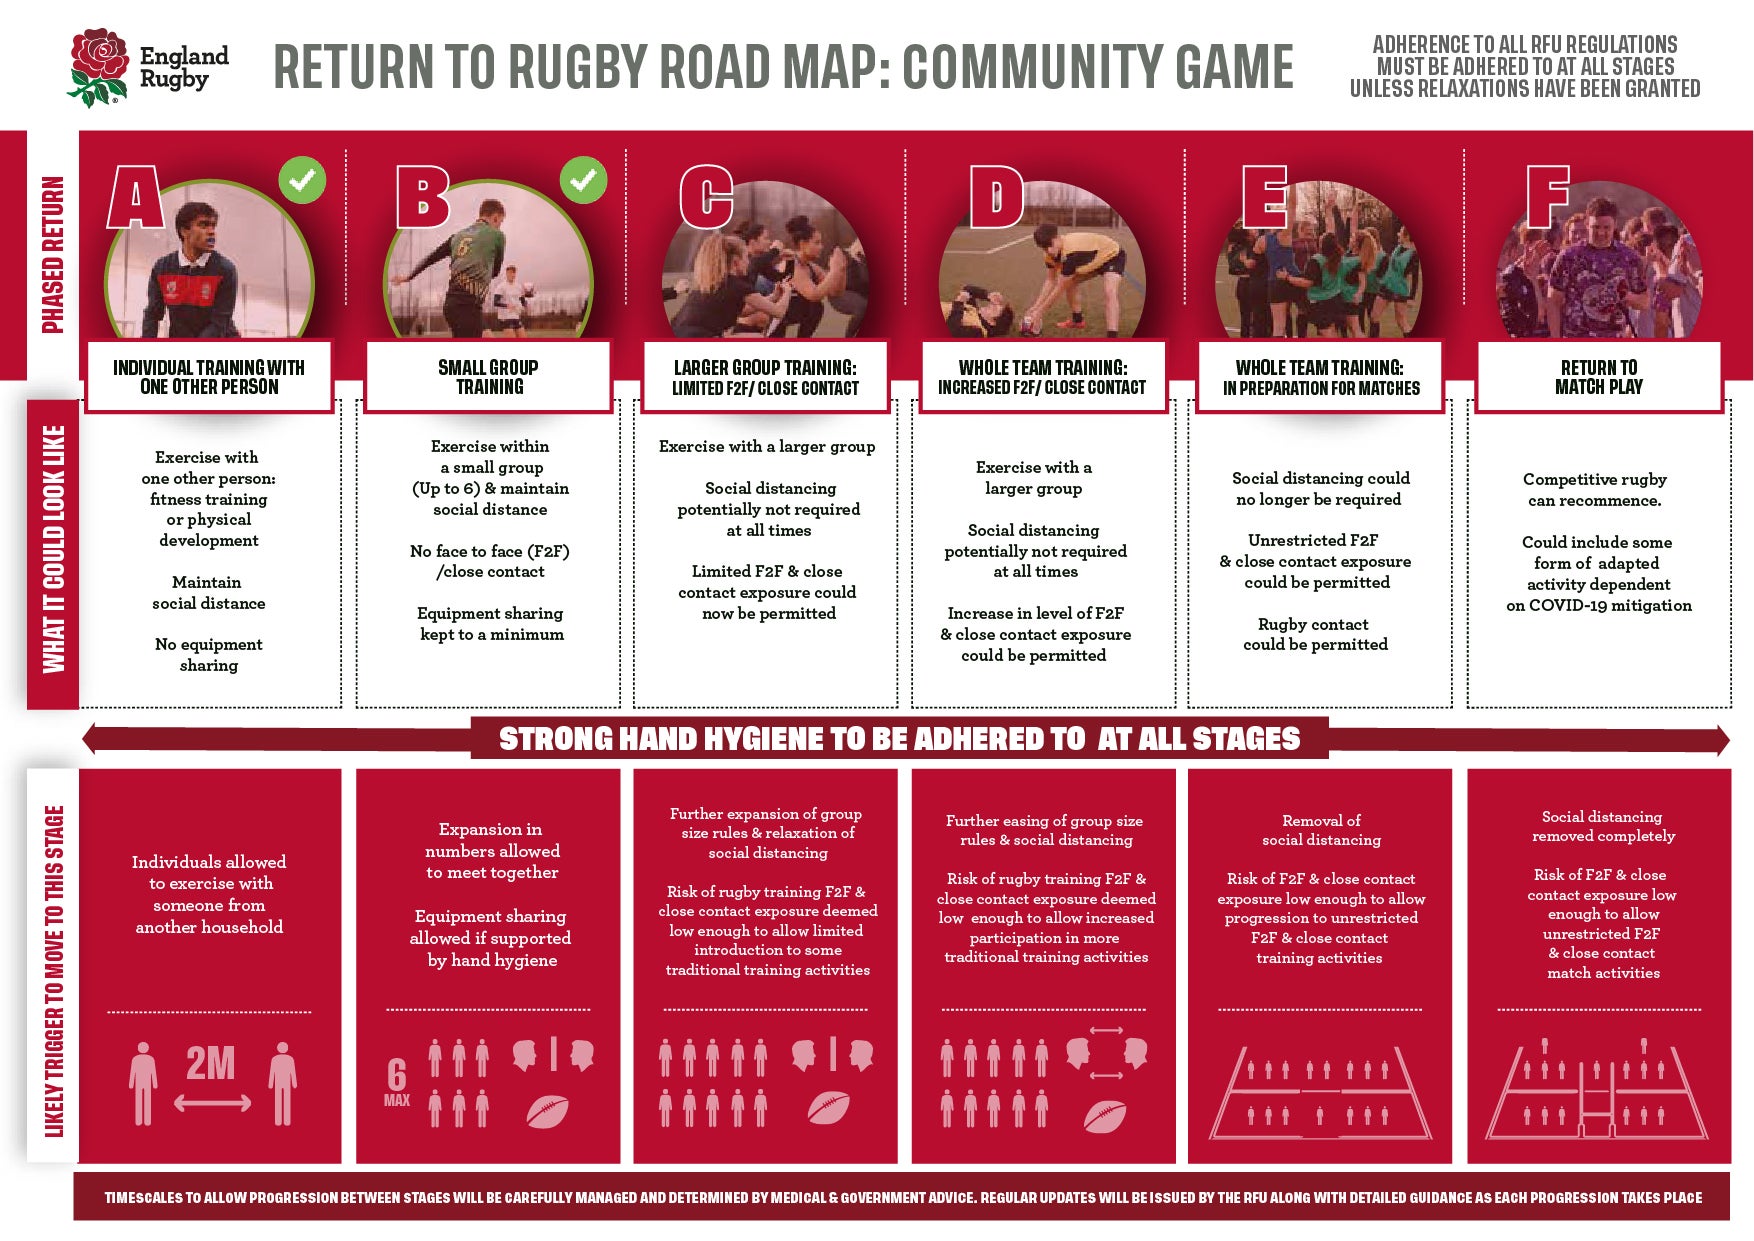 The six-stage Road Map outlined for rugby union's return